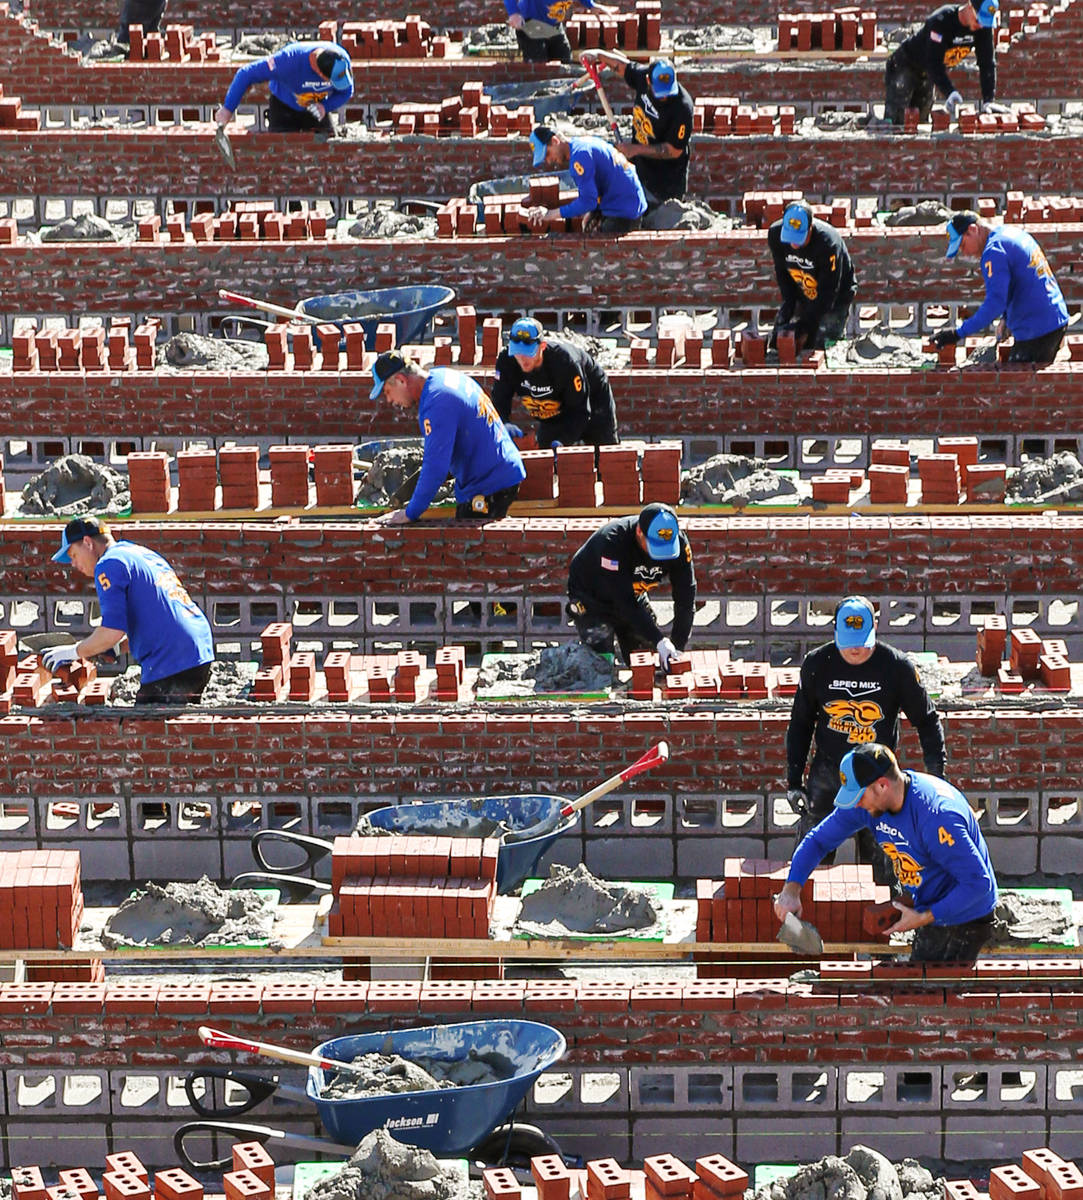 Competitors compete in the 2020 Spec Mix Bricklayer 500 during the World of Concrete on Wednesd ...